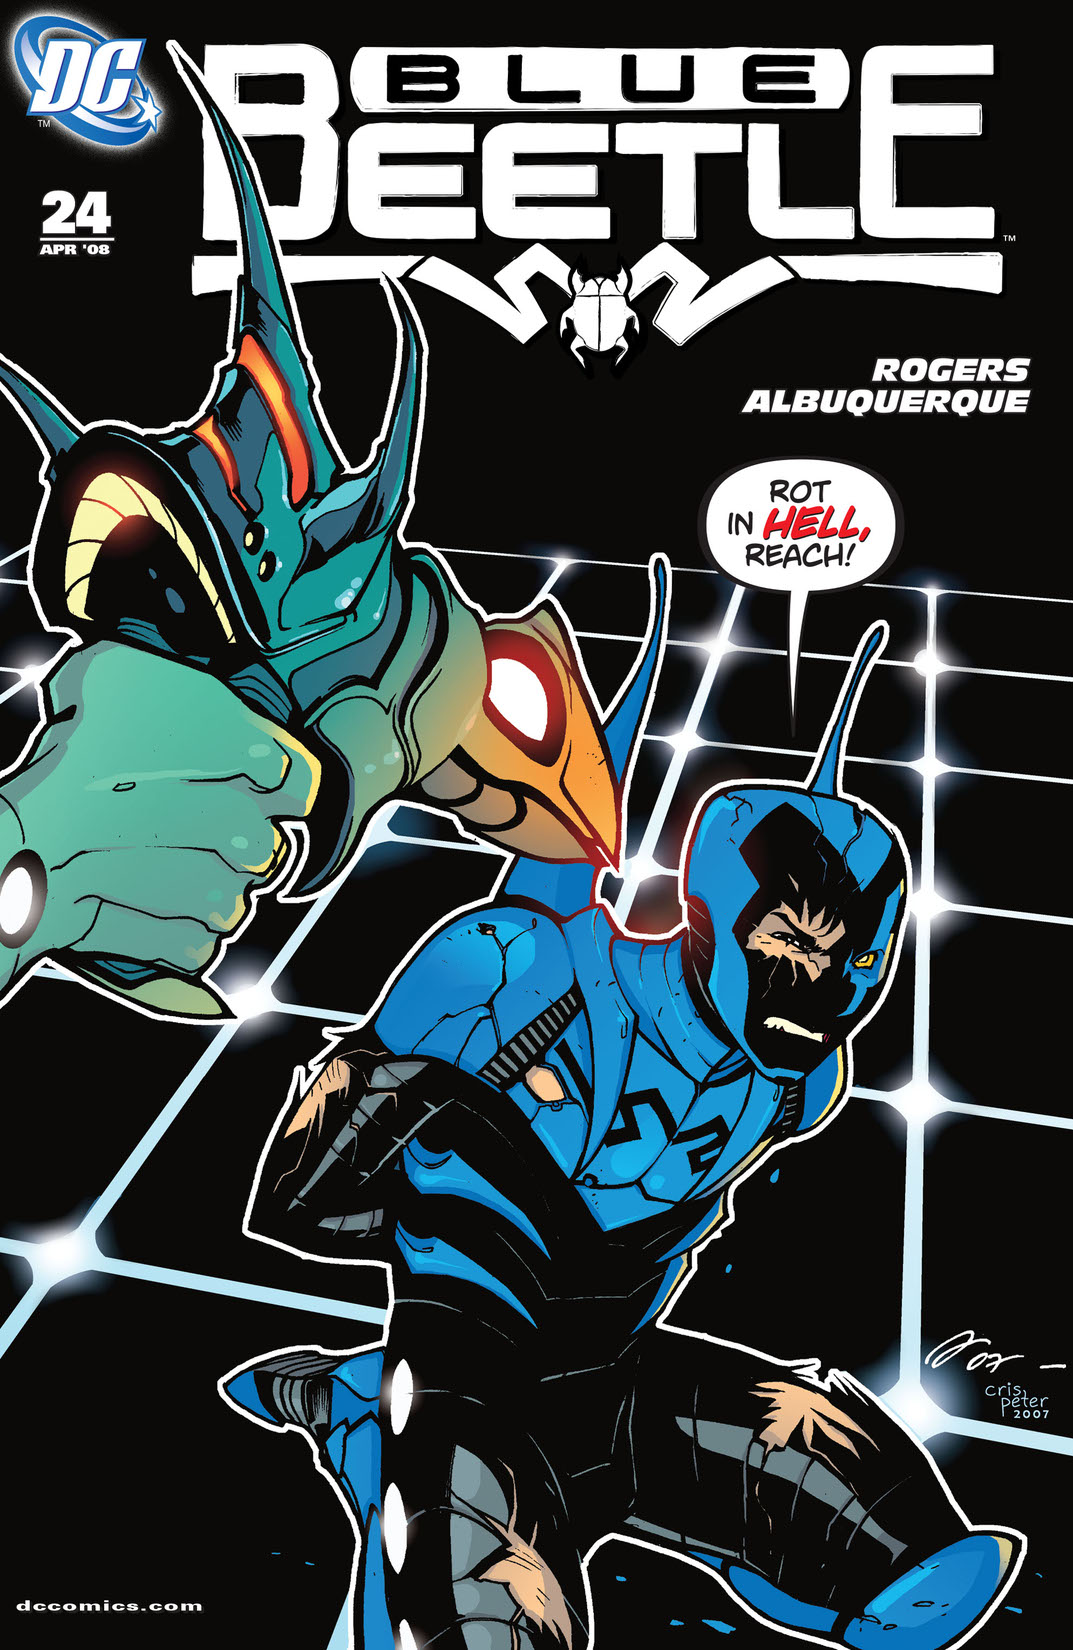 Blue Beetle (2006-) #24 preview images